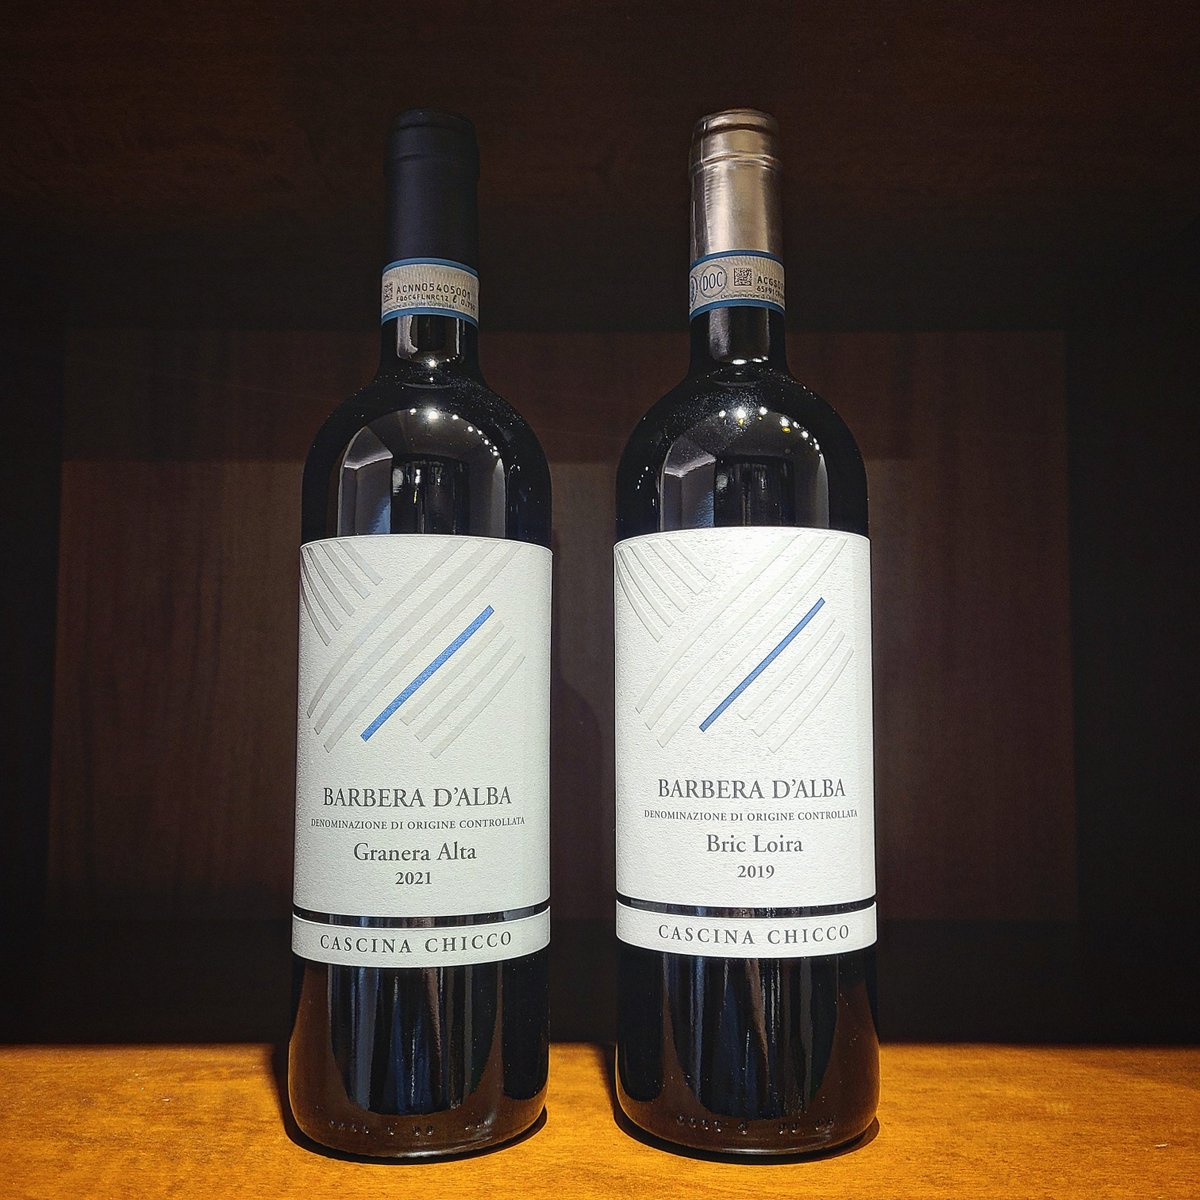 Hello #winelover🍷
Here you see our two #barbera 🥳
Do you prefer the ready drinkability and the freshness of #GraneraAlta or the complexity and body of #BricLoira ⁉️
Let us know ⬇️⬇️ 😎
#cascinachicco #redwines #barbera #Roero #UNESCO  #winetastings #winepairing